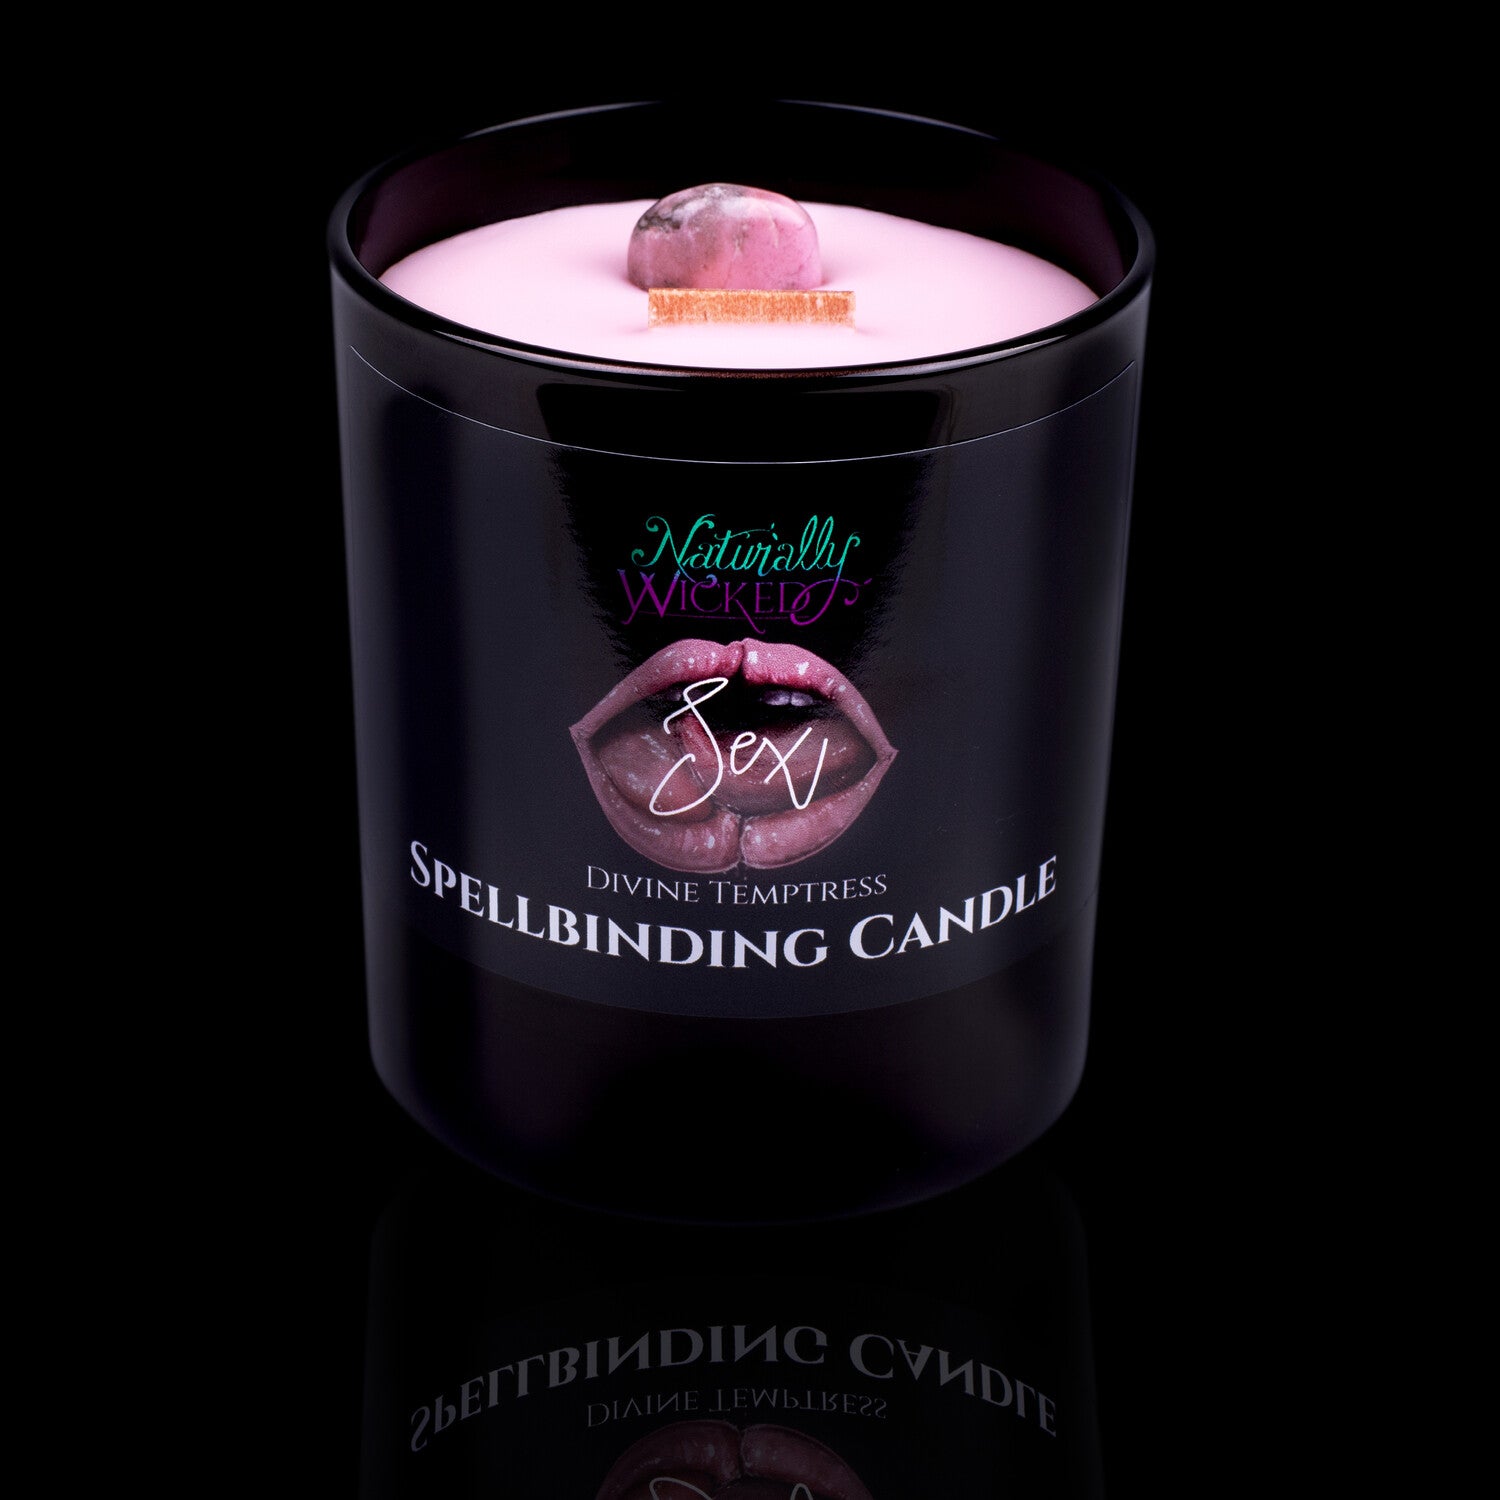 The Sexiest Gift On Earth. Naturally Wicked Spellbinding Sex Crystal Candle Entombed In Pink Plant-Based Wax With Crackling Wood Wick & Rhodonite Crystal